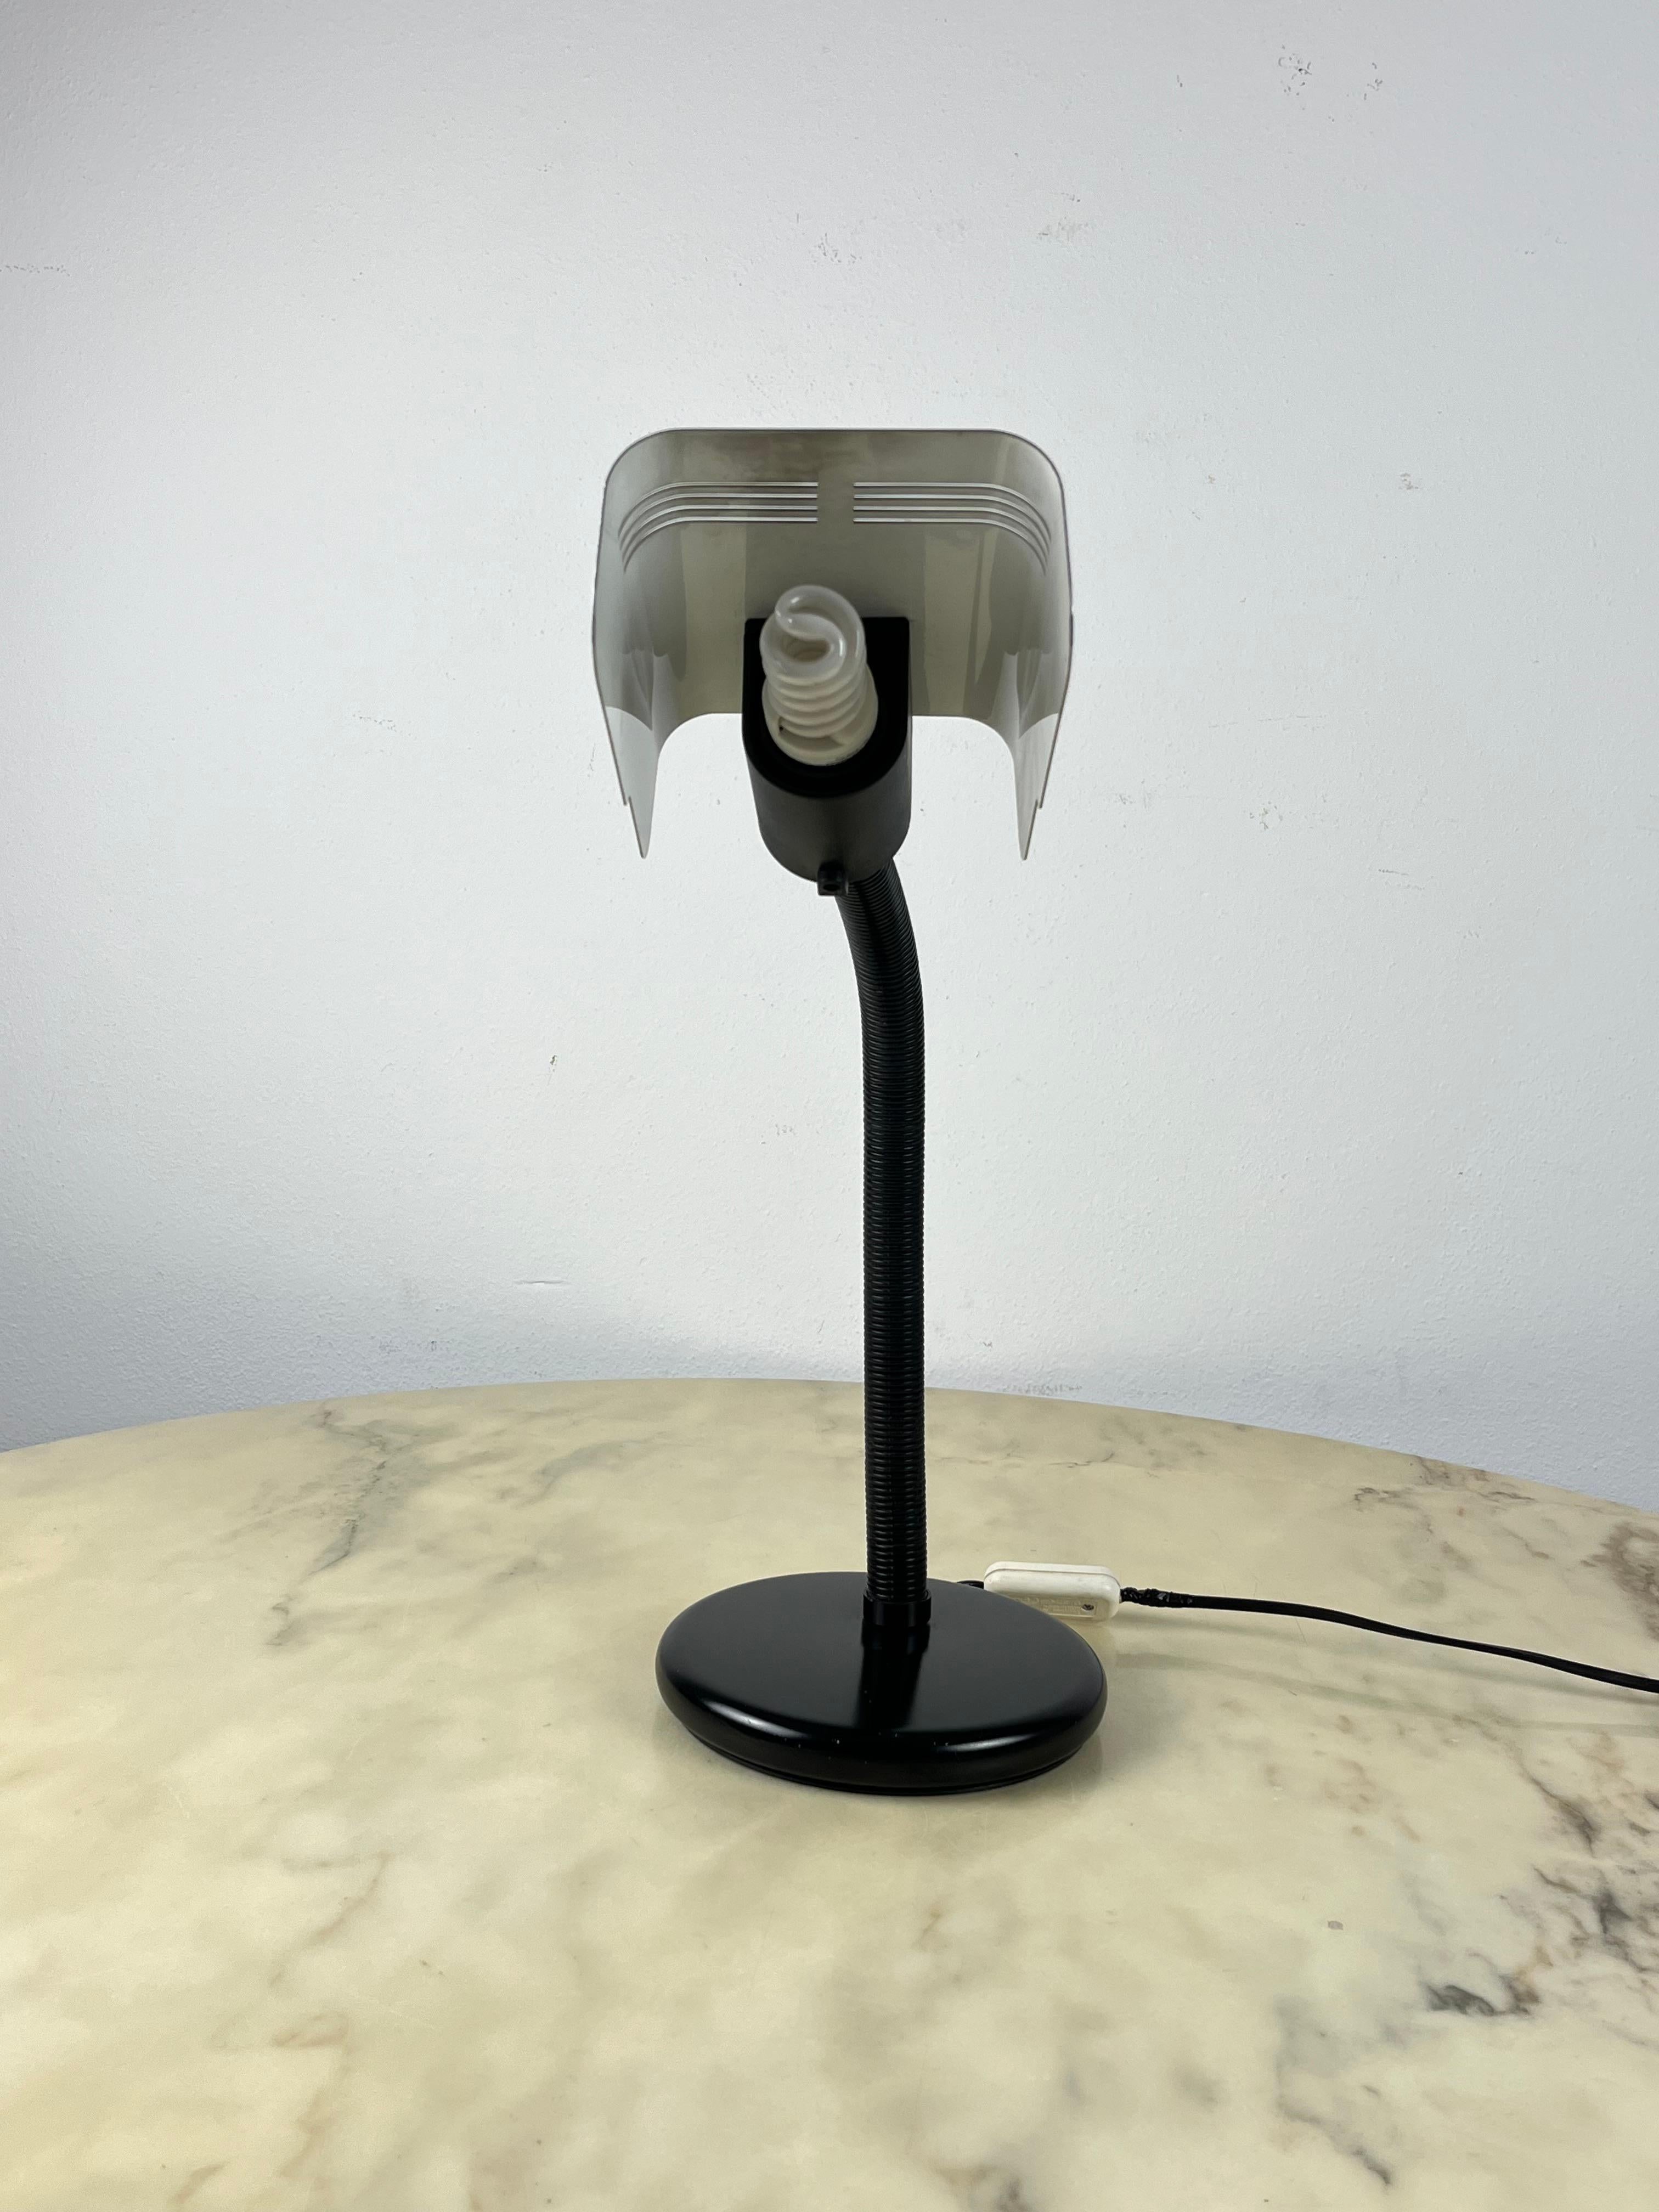 Targetti Sankey Table Lamp, by Gino Sarfatti, Italy, 1970s For Sale 2